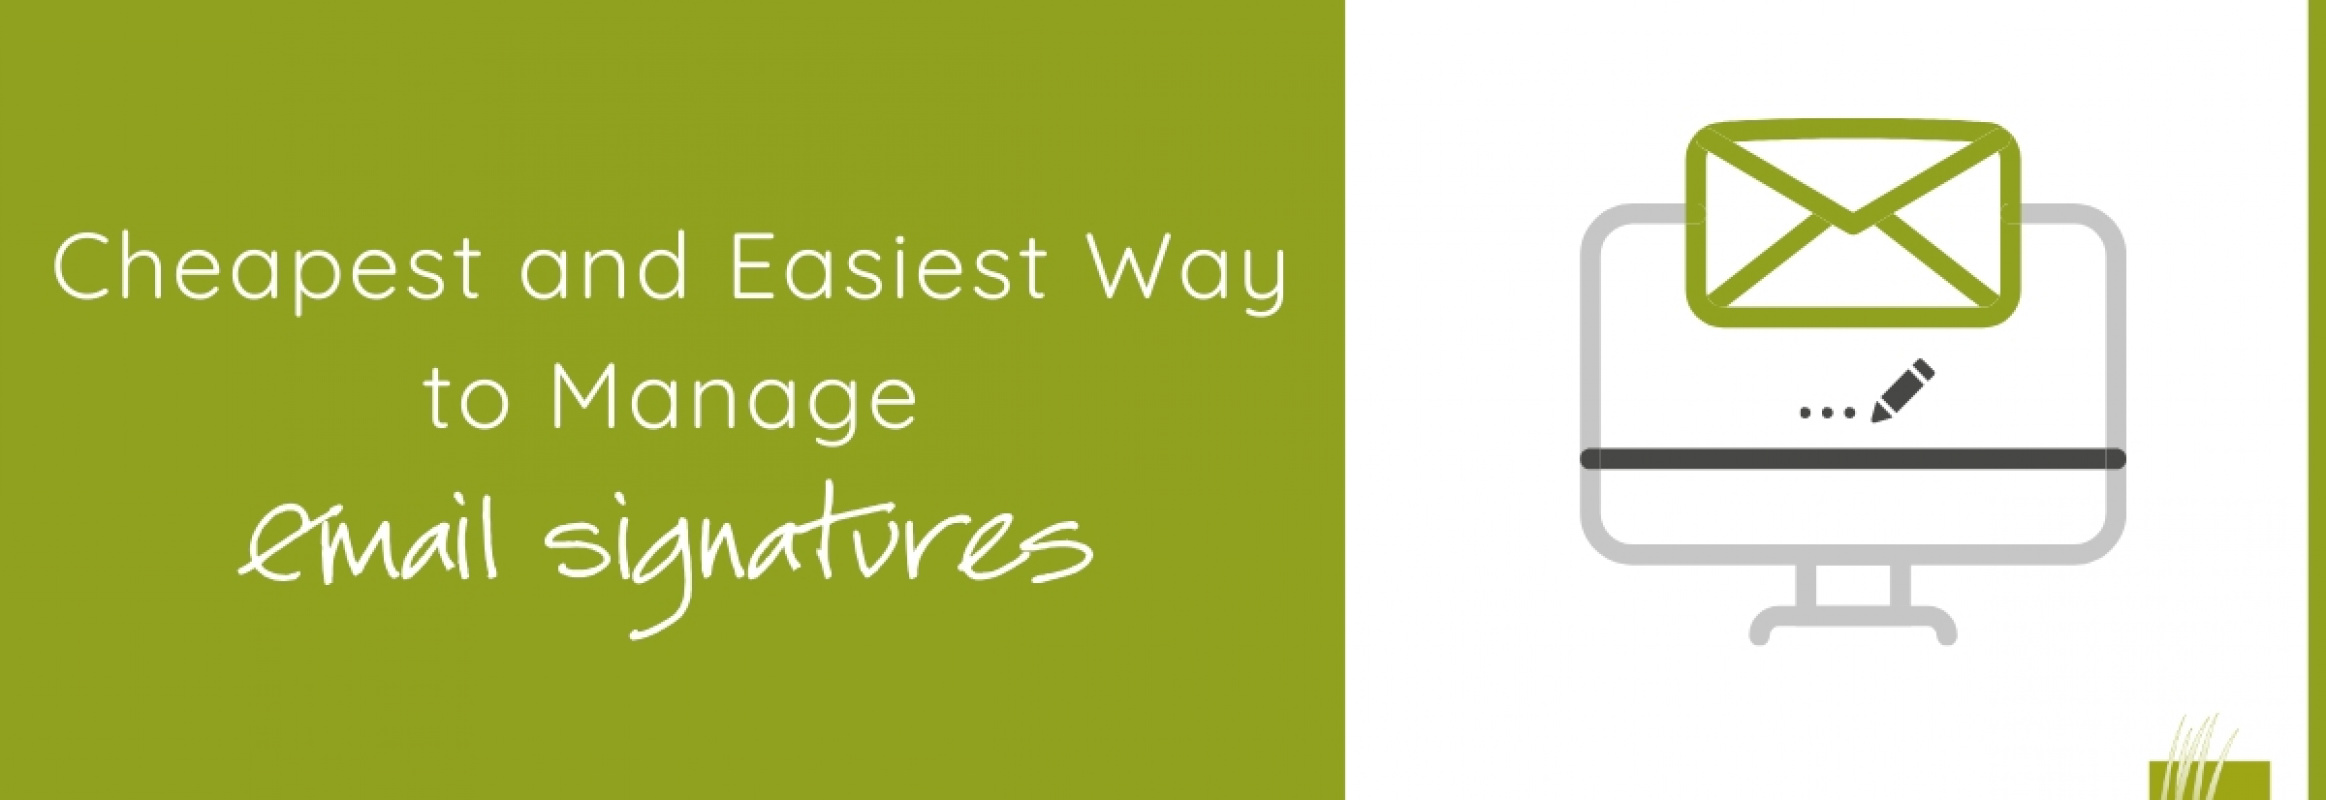 Cheapest & Easiest Way To Manage Email Signature